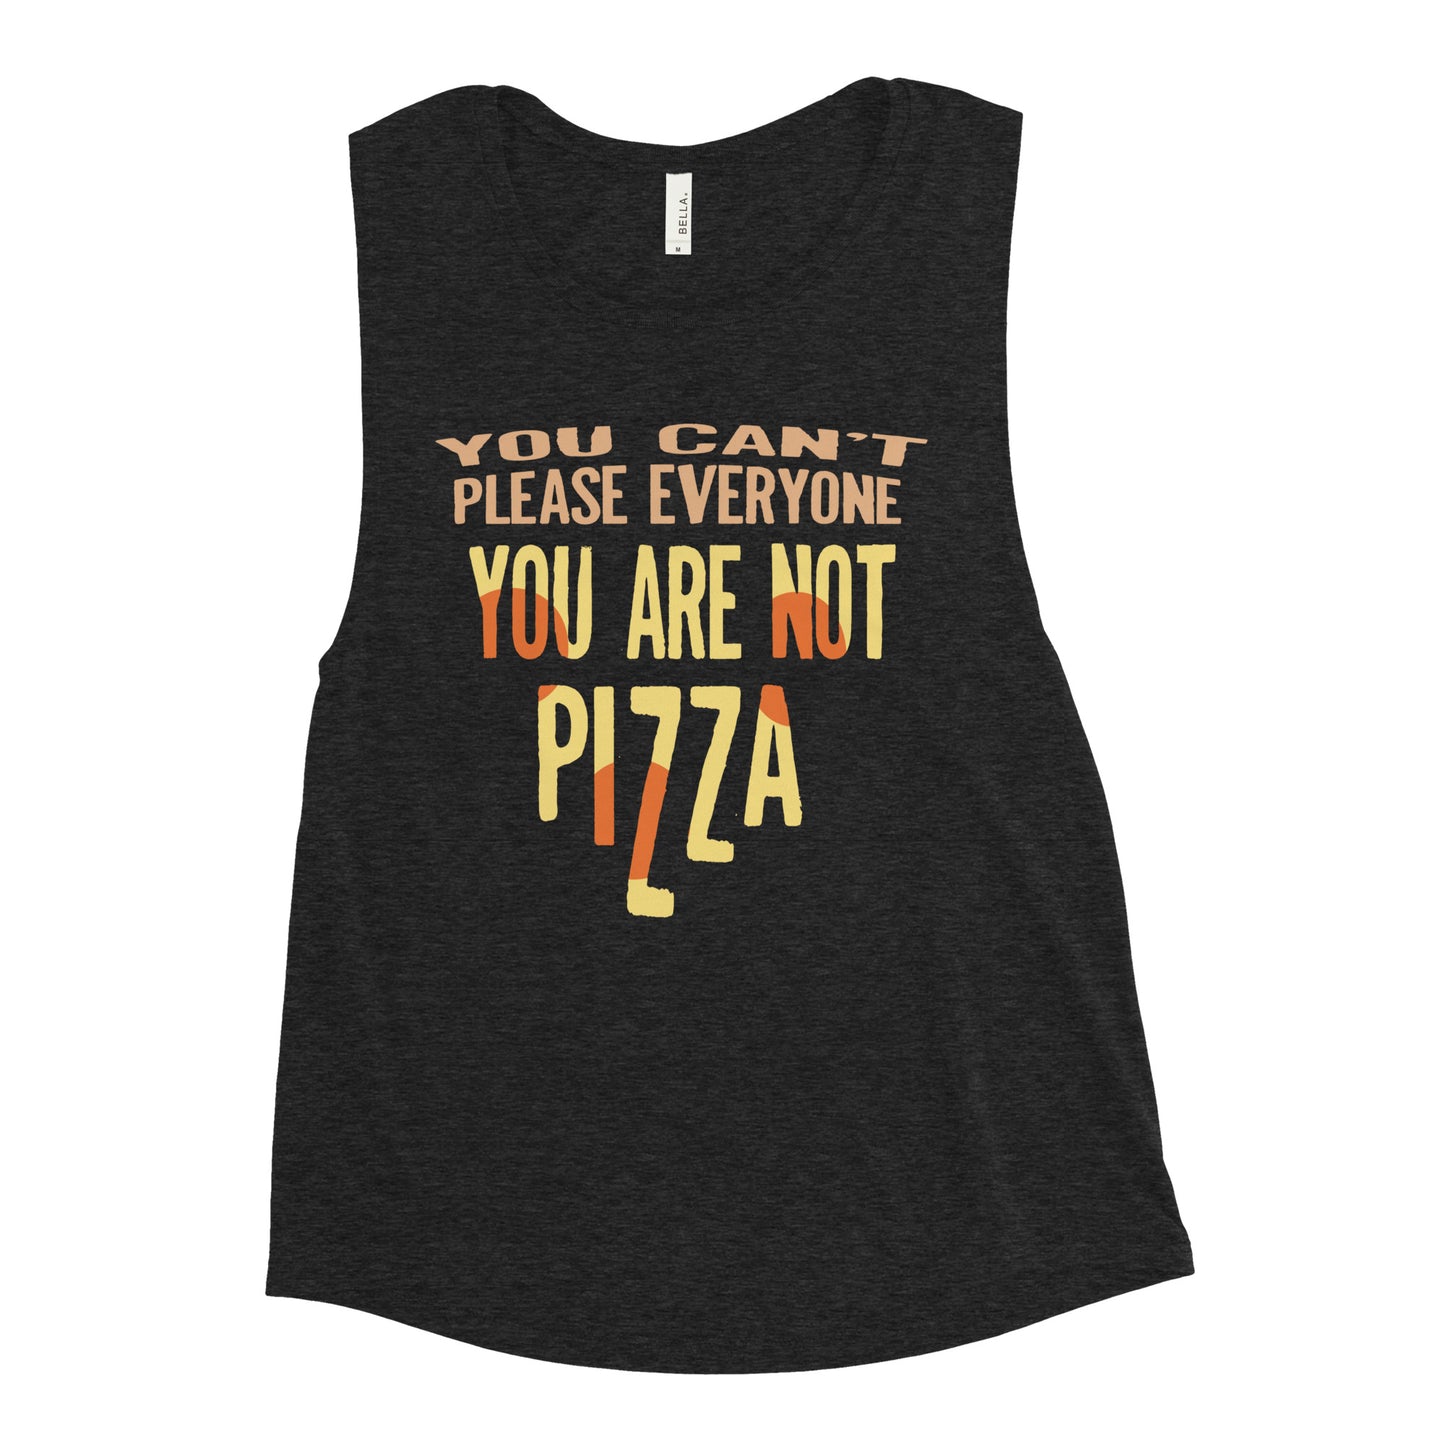 You Are Not Pizza Women's Muscle Tank